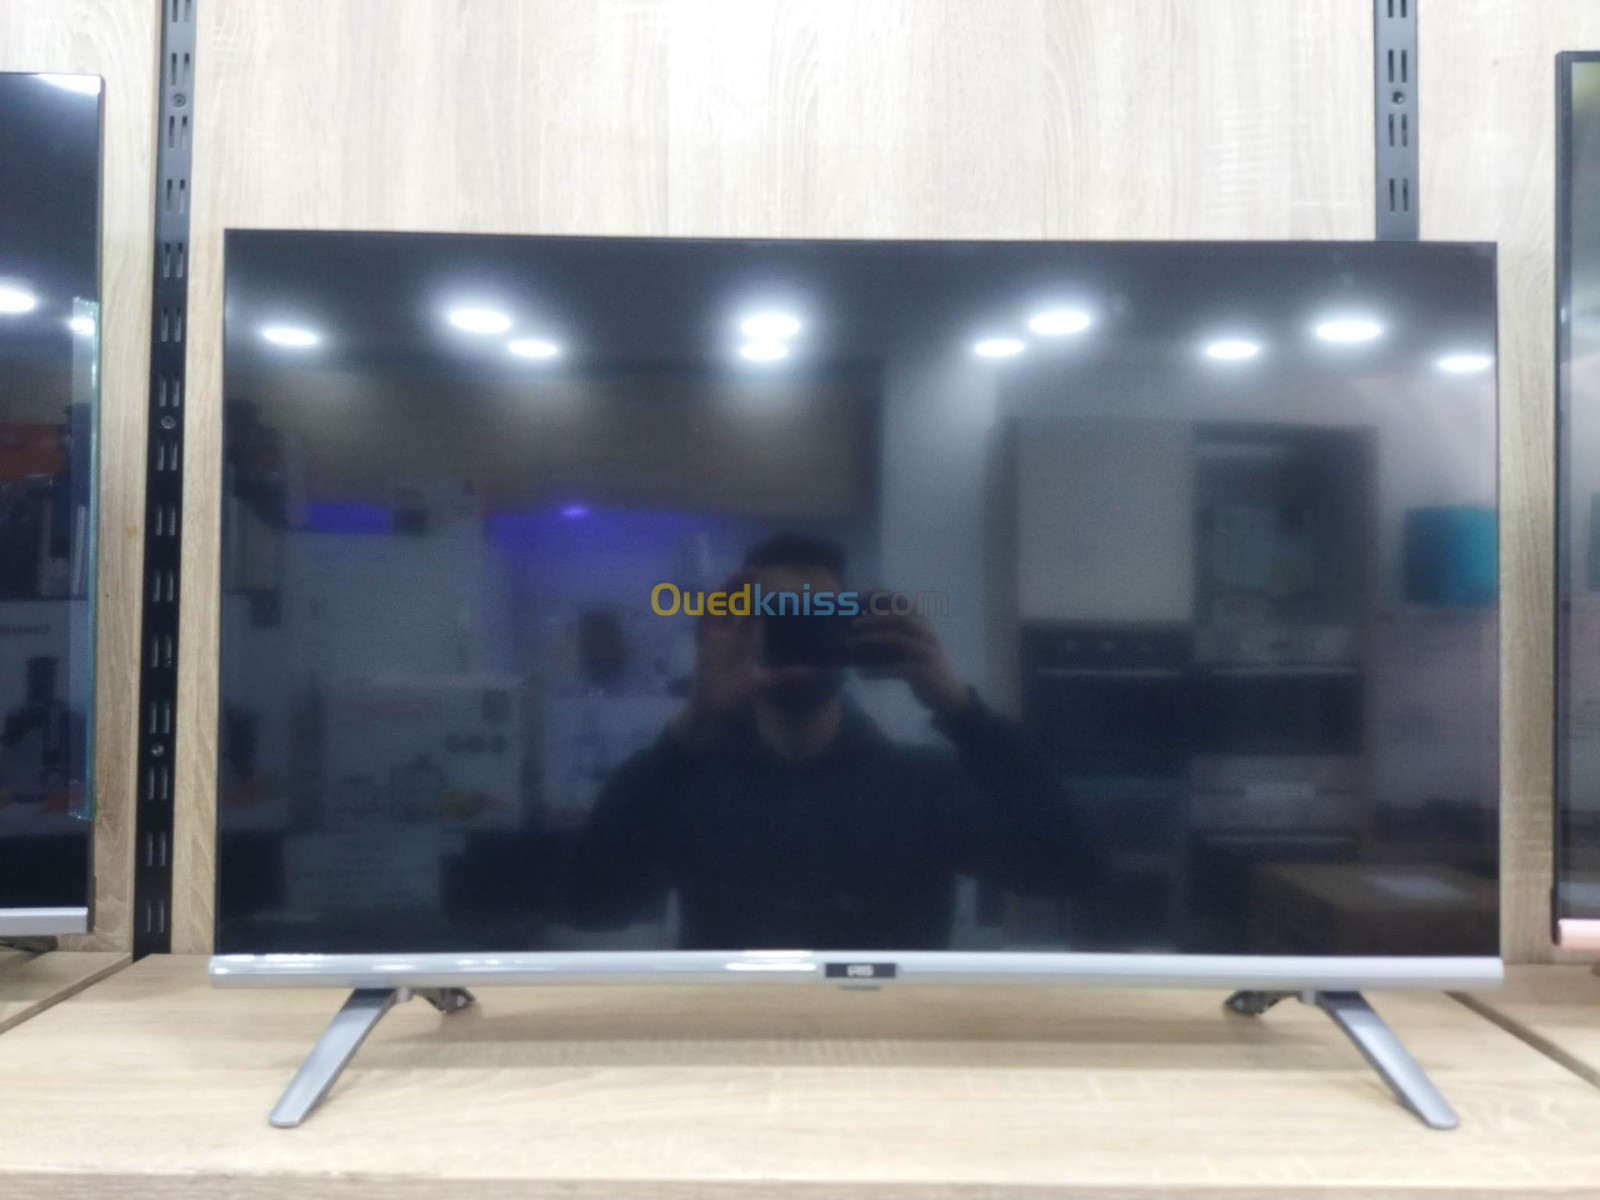 TV IRIS 32 G4010 SMART ANDROID FHD 